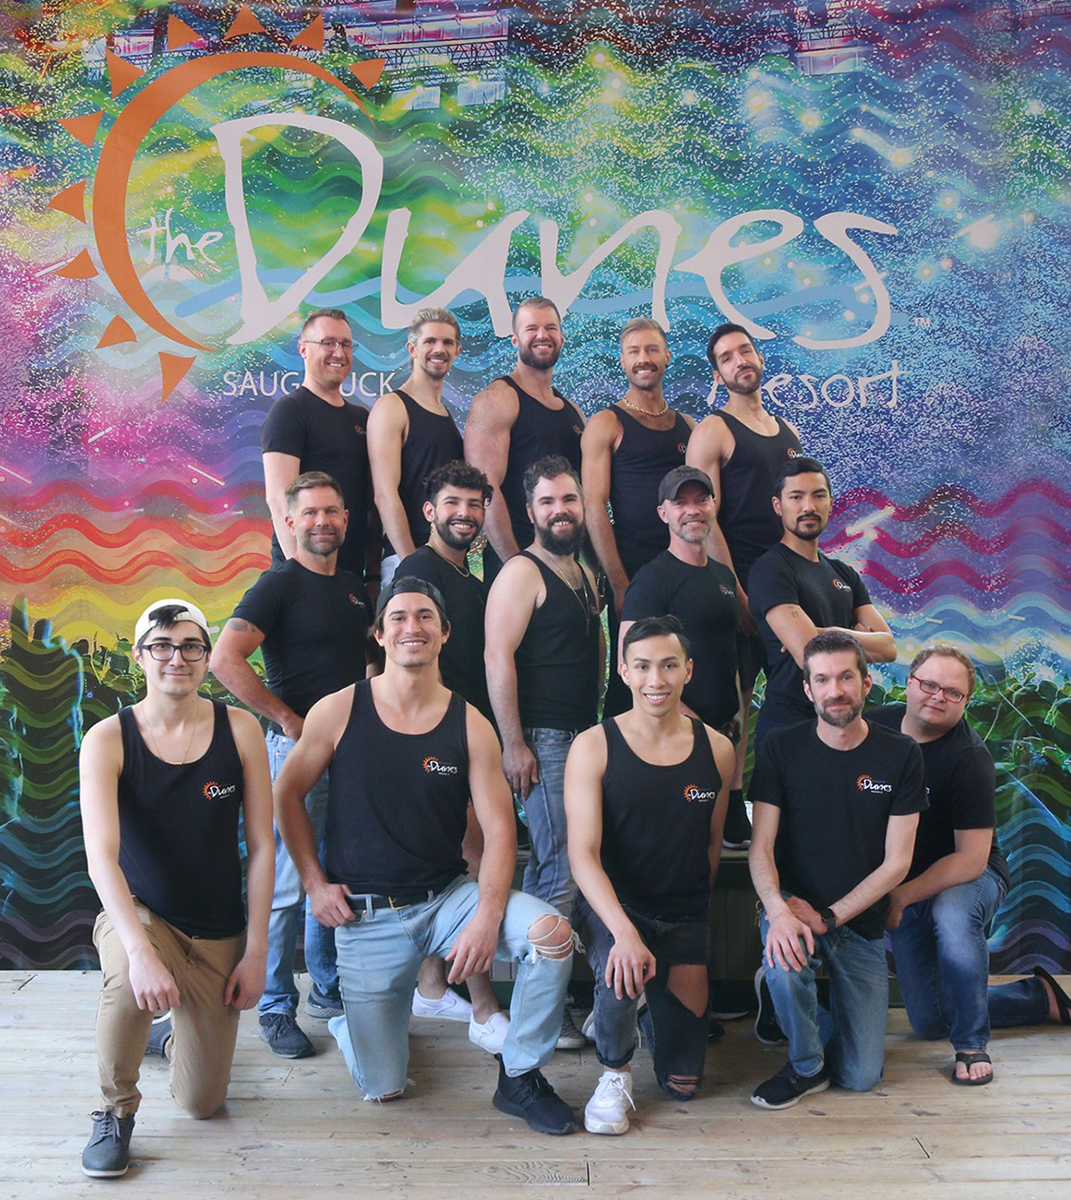 The Dunes Resort of Saugatuck employees pose in front of company sign as a team.